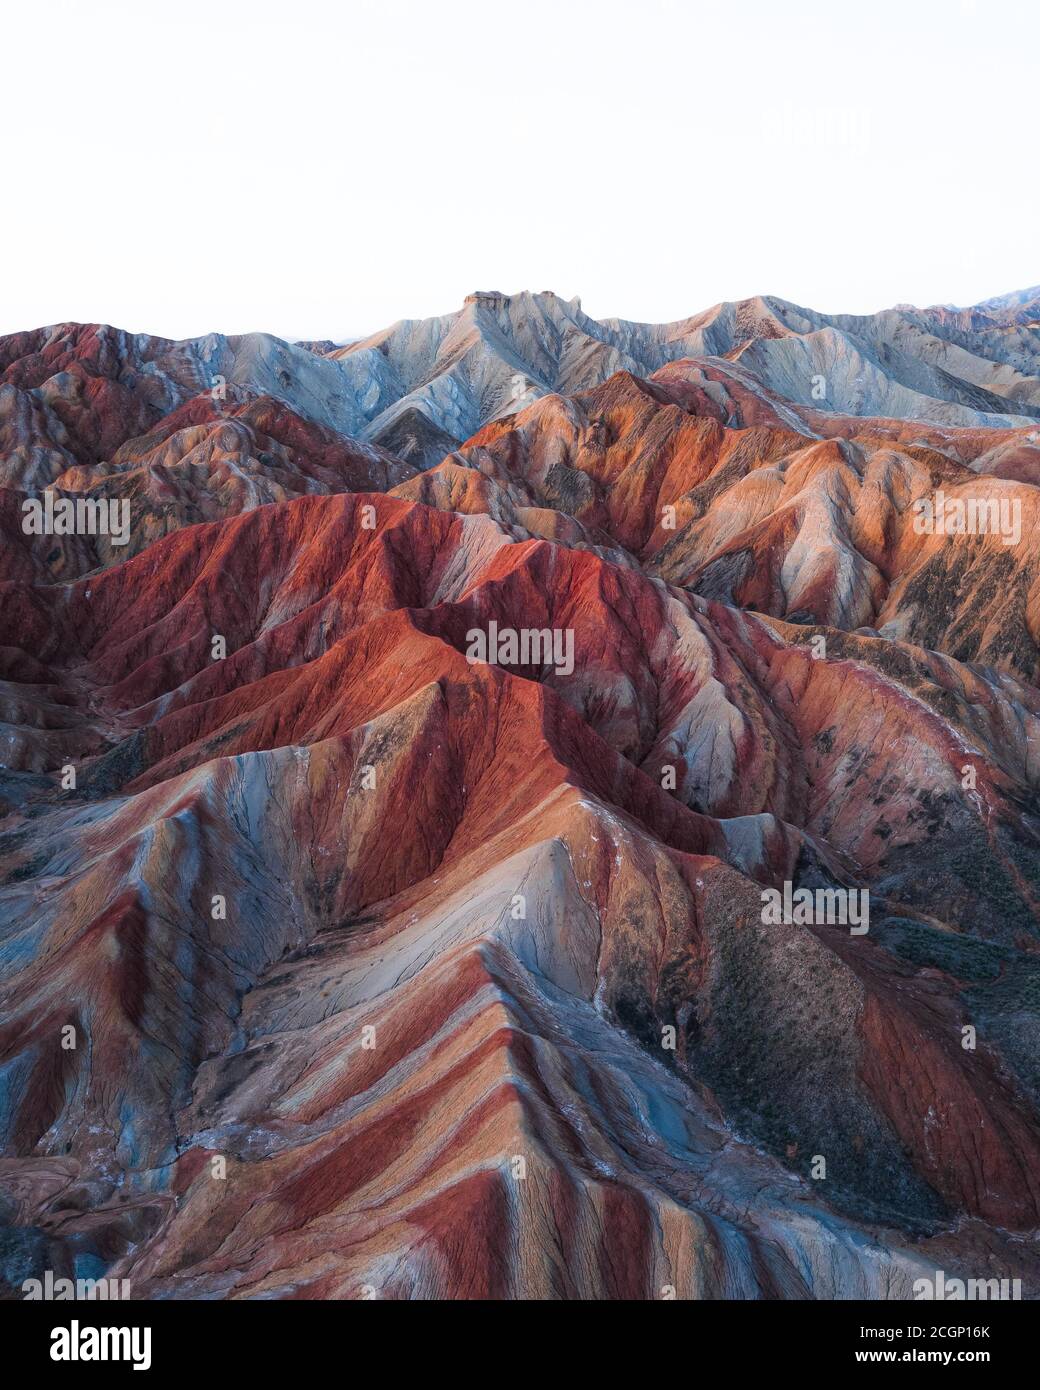 Red sandstone mountains of different minerals, Zhangye Danxia Geopark, China Stock Photo